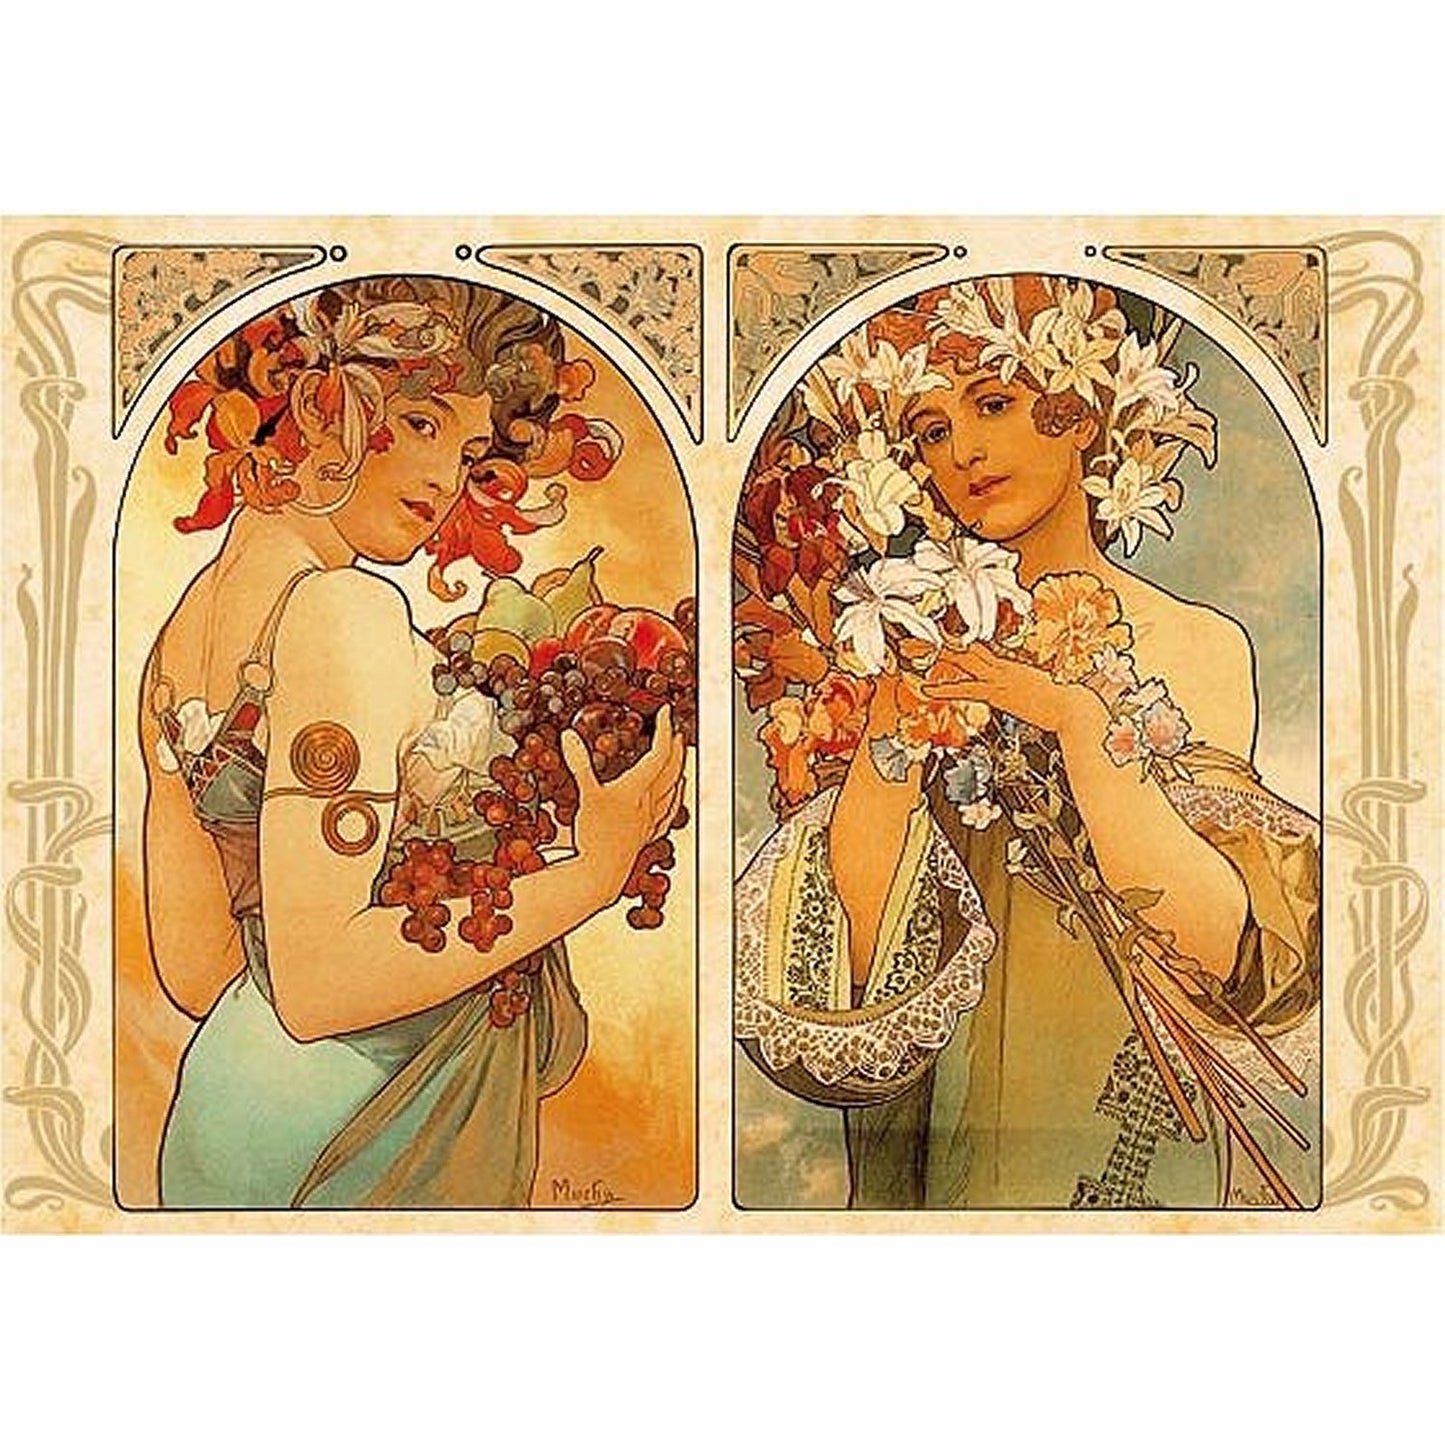 Dtoys - Alphonse Mucha : Fruit and Flower Dyptich - 1000 Piece Jigsaw Puzzle